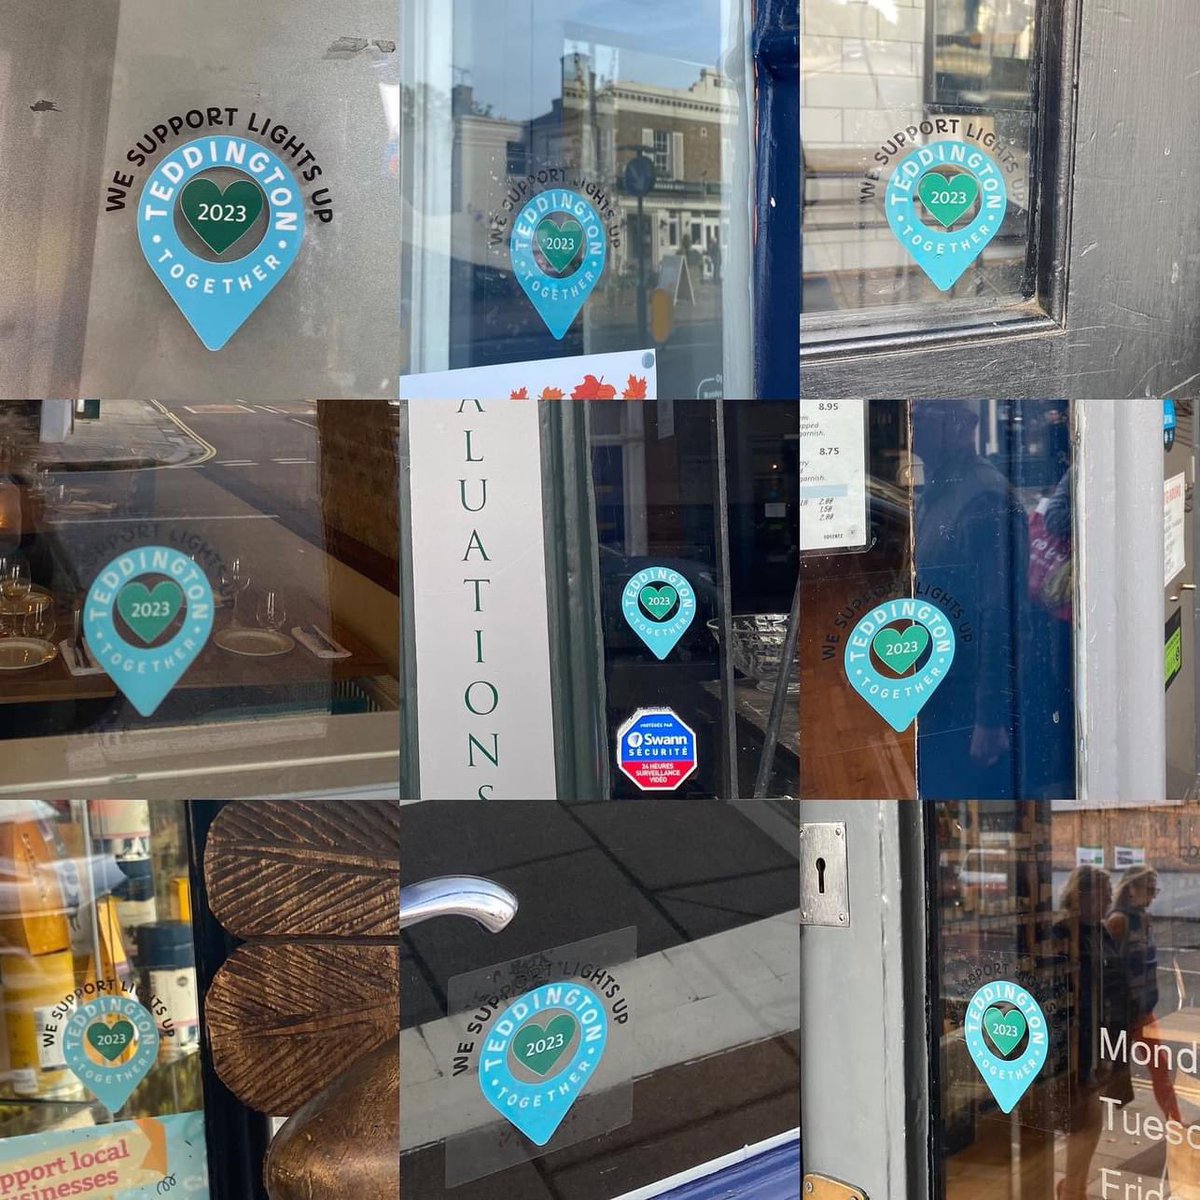 These stickers are appearing all over Teddington, to show those who have paid towards the 2023 Christmas Lights Up event. Please show your support by patronising these businesses. A few are not able to put in windows due to company policy so please ask! @TeddingtonNub